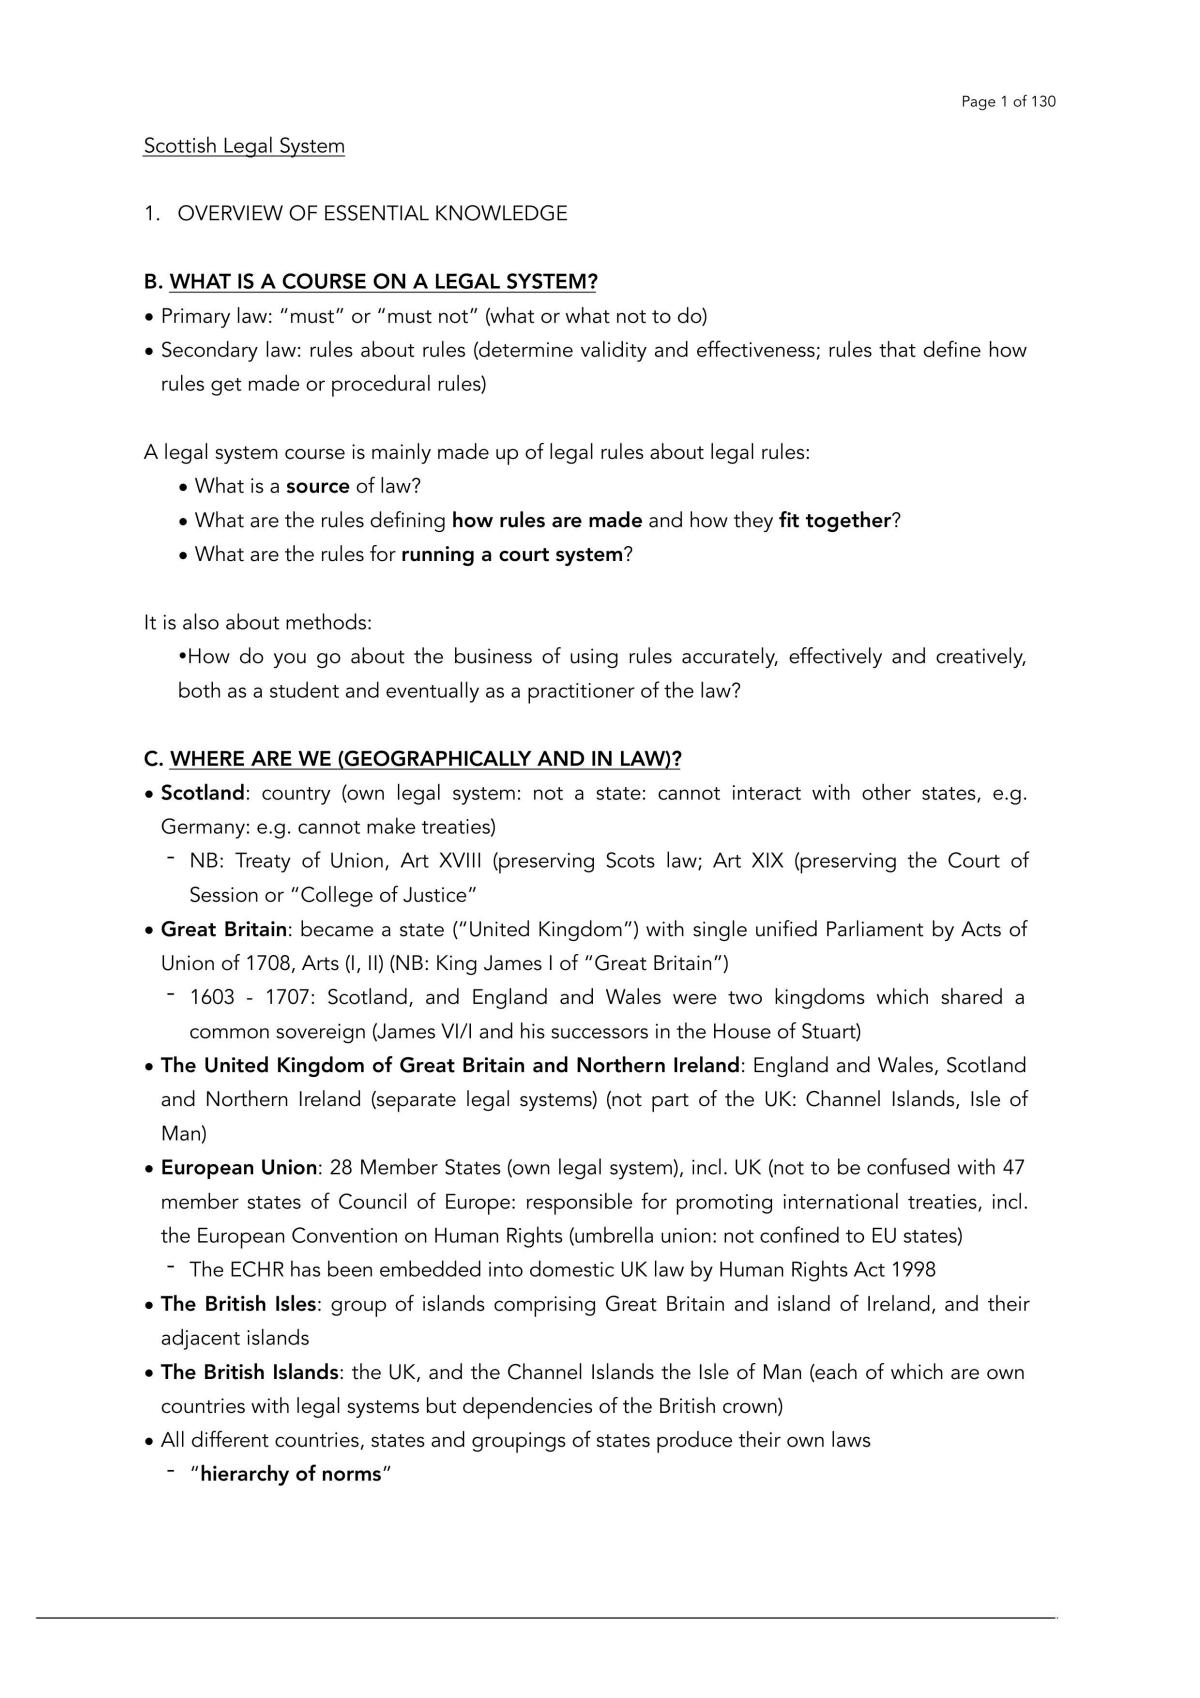 Scottish Legal System Course Notes - Page 1